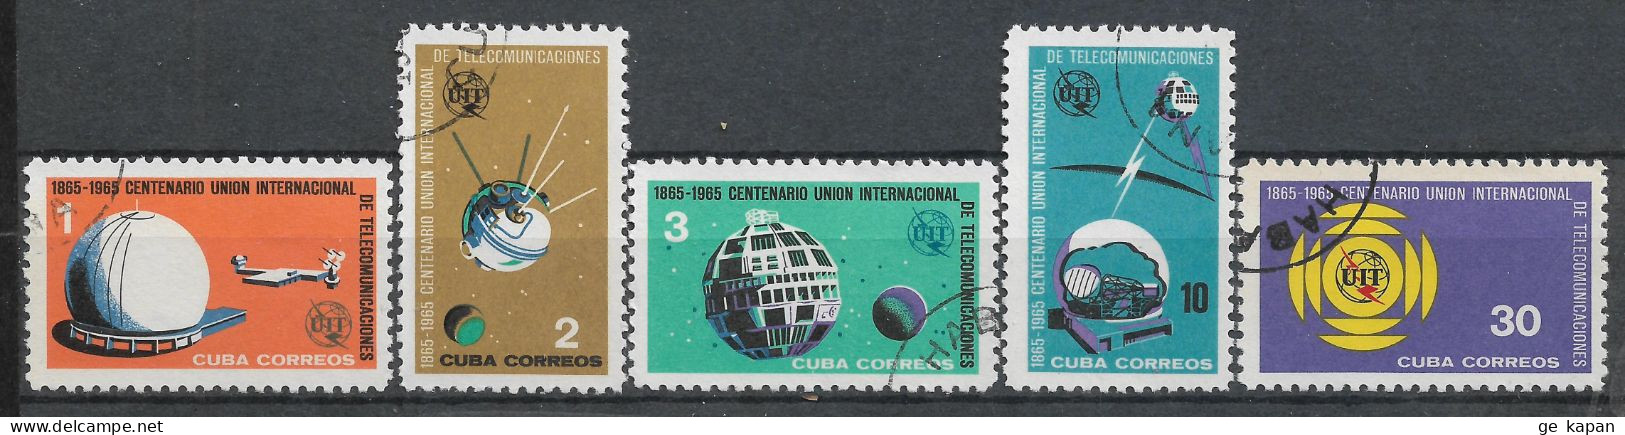 1965 CUBA COMPLETE SET OF 5 USED STAMPS (Michel # 1026-1030) CV €2.30 - Gebraucht